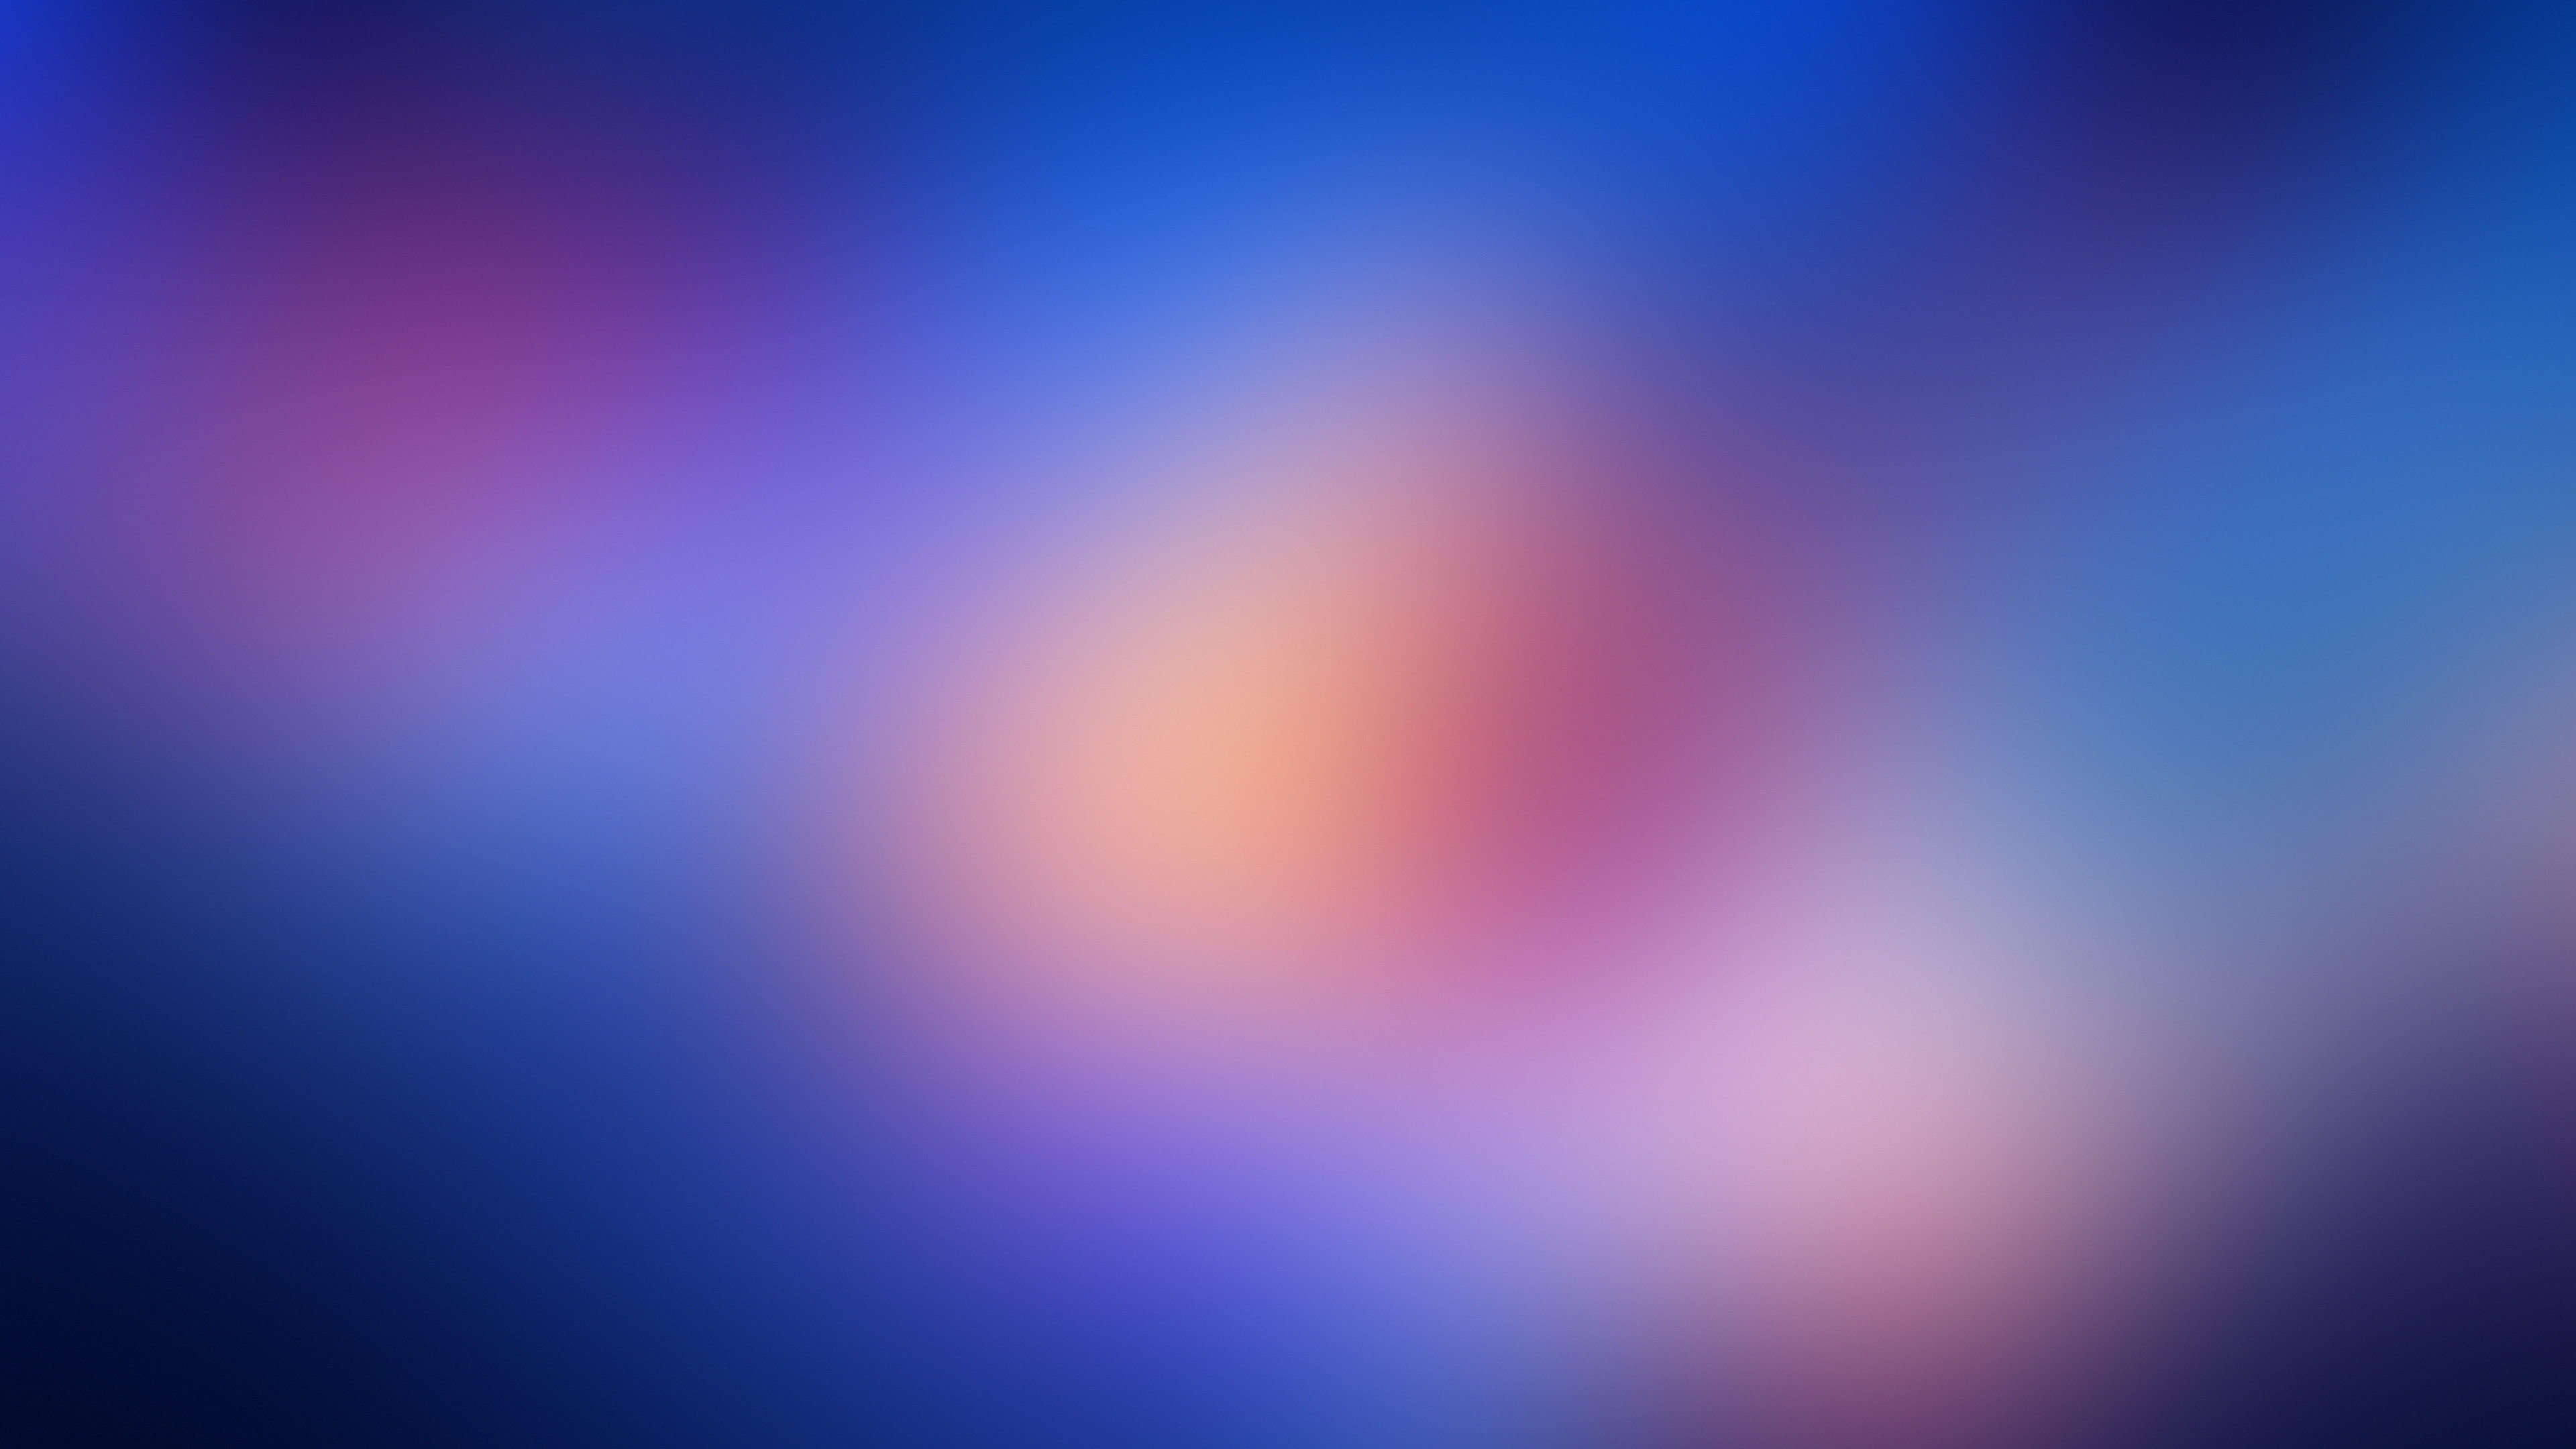 abstract blur 4k 1553075272 - Abstract Blur 4k - hd-wallpapers, deviantart wallpapers, blur wallpapers, abstract wallpapers, 5k wallpapers, 4k-wallpapers